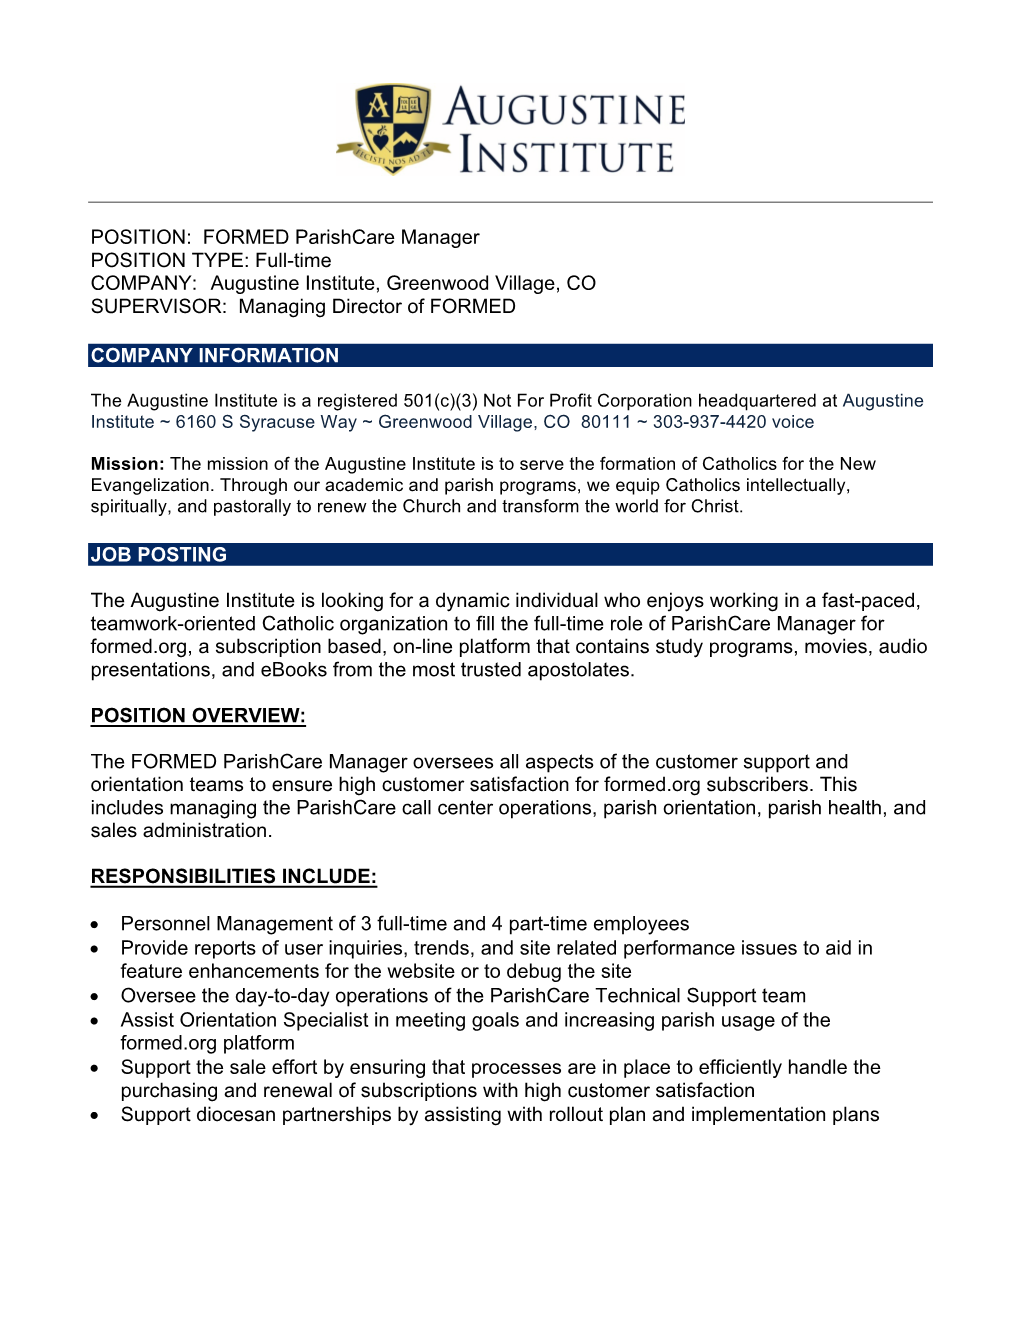 FORMED Parishcare Manager POSITION TYPE: Full-Time COMPANY: Augustine Institute, Greenwood Village, CO SUPERVISOR: Managing Director of FORMED